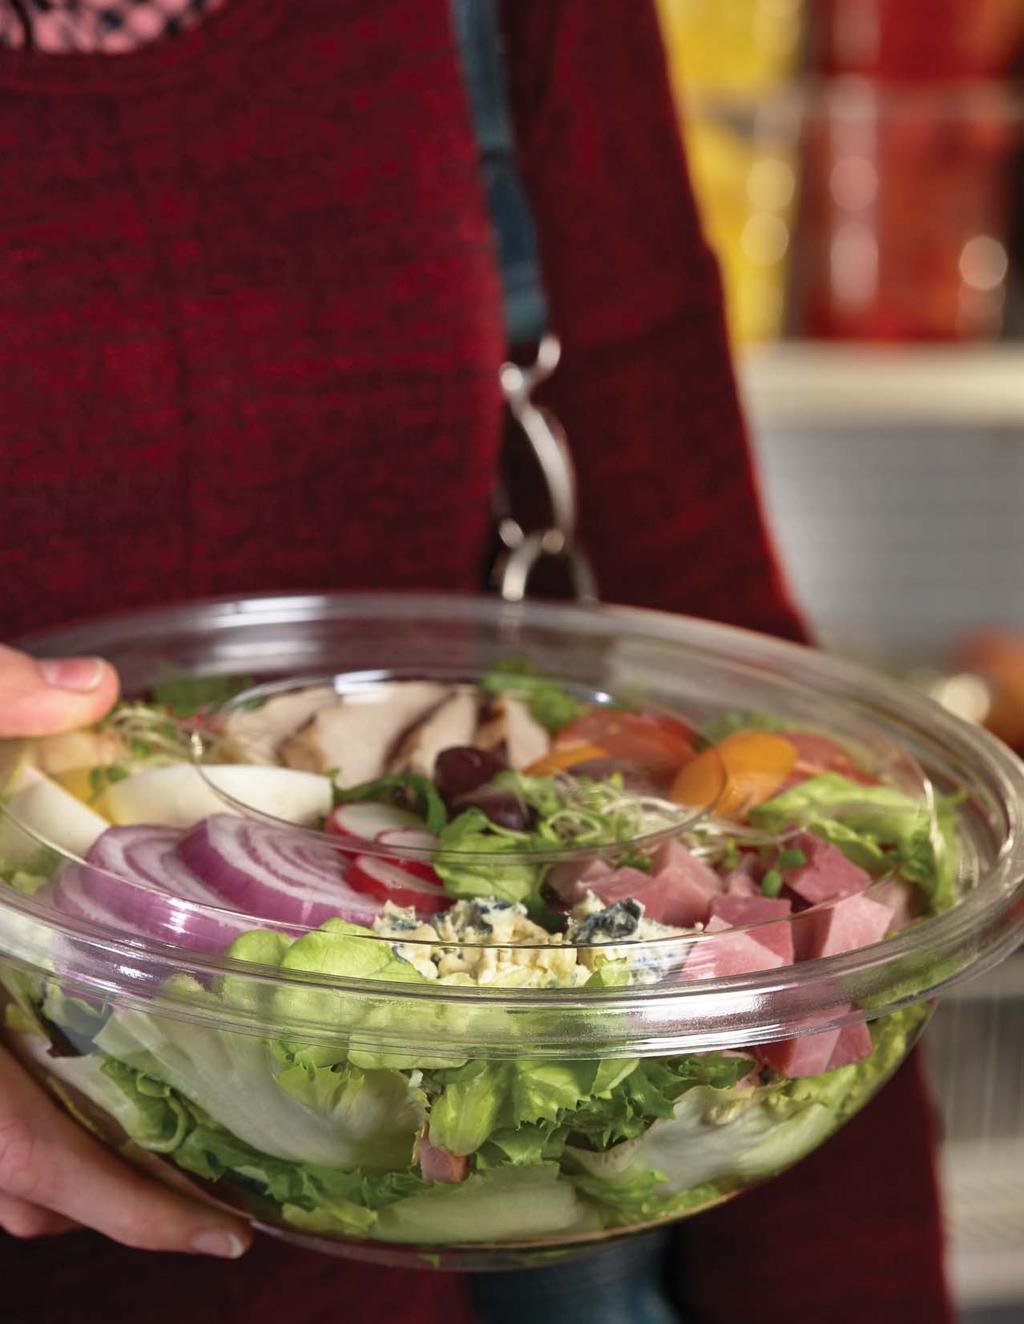 ROUND BOWLS SHOWCASE FRESH SALADS, FRUITS AND VEGGIES Make your operation the go-to